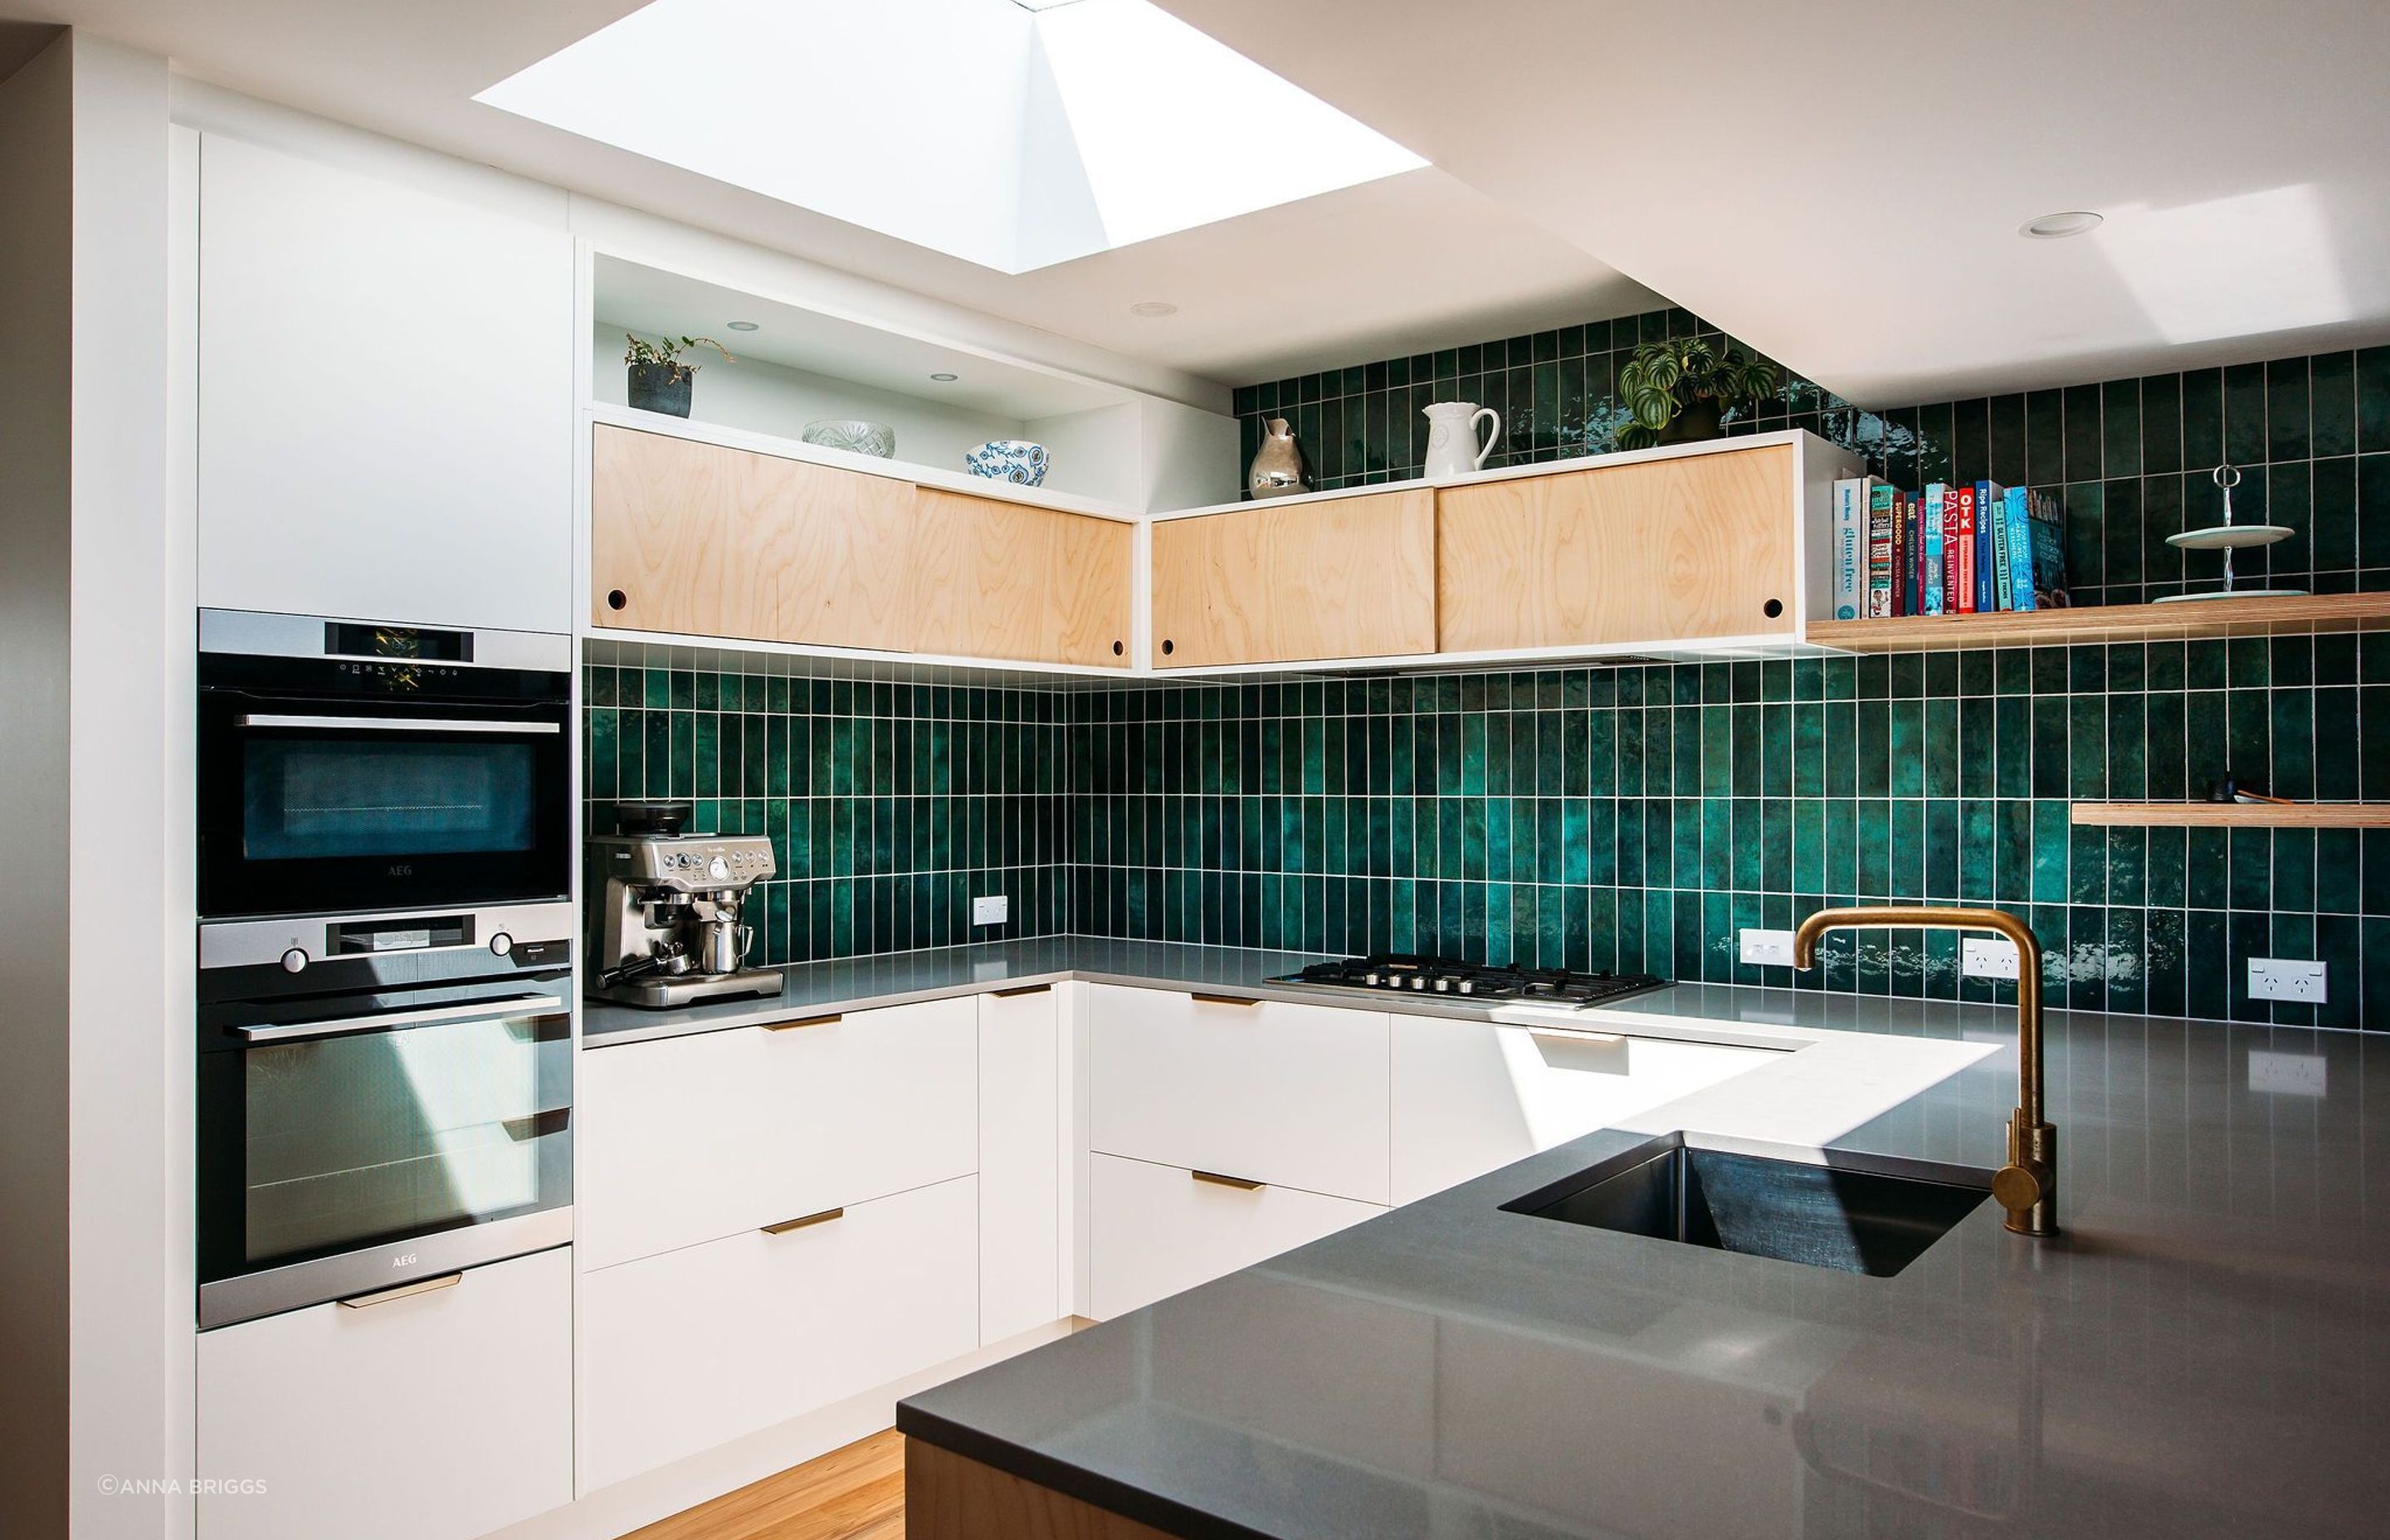 A great working layout with the sink, hob and ovens in a triangle. The fridge sits on the opposite wall.